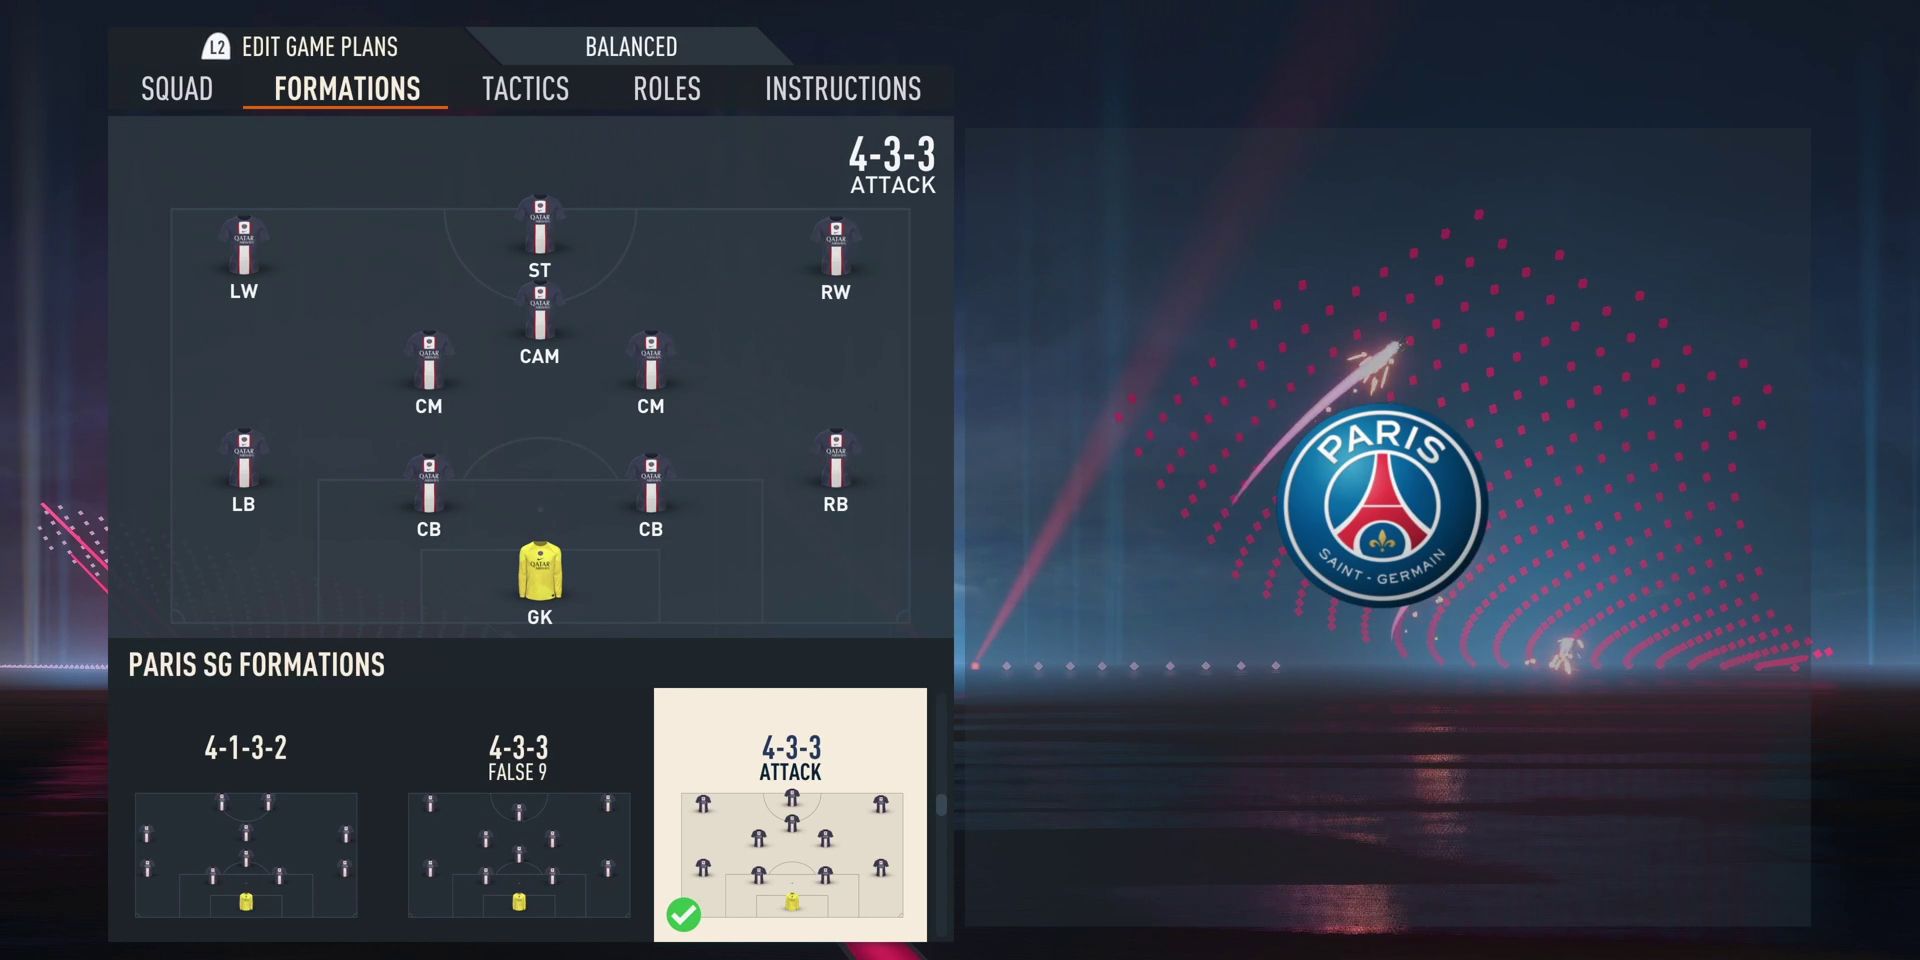 FIFA 23 The Highest Formation & Beginning 11 For PSG